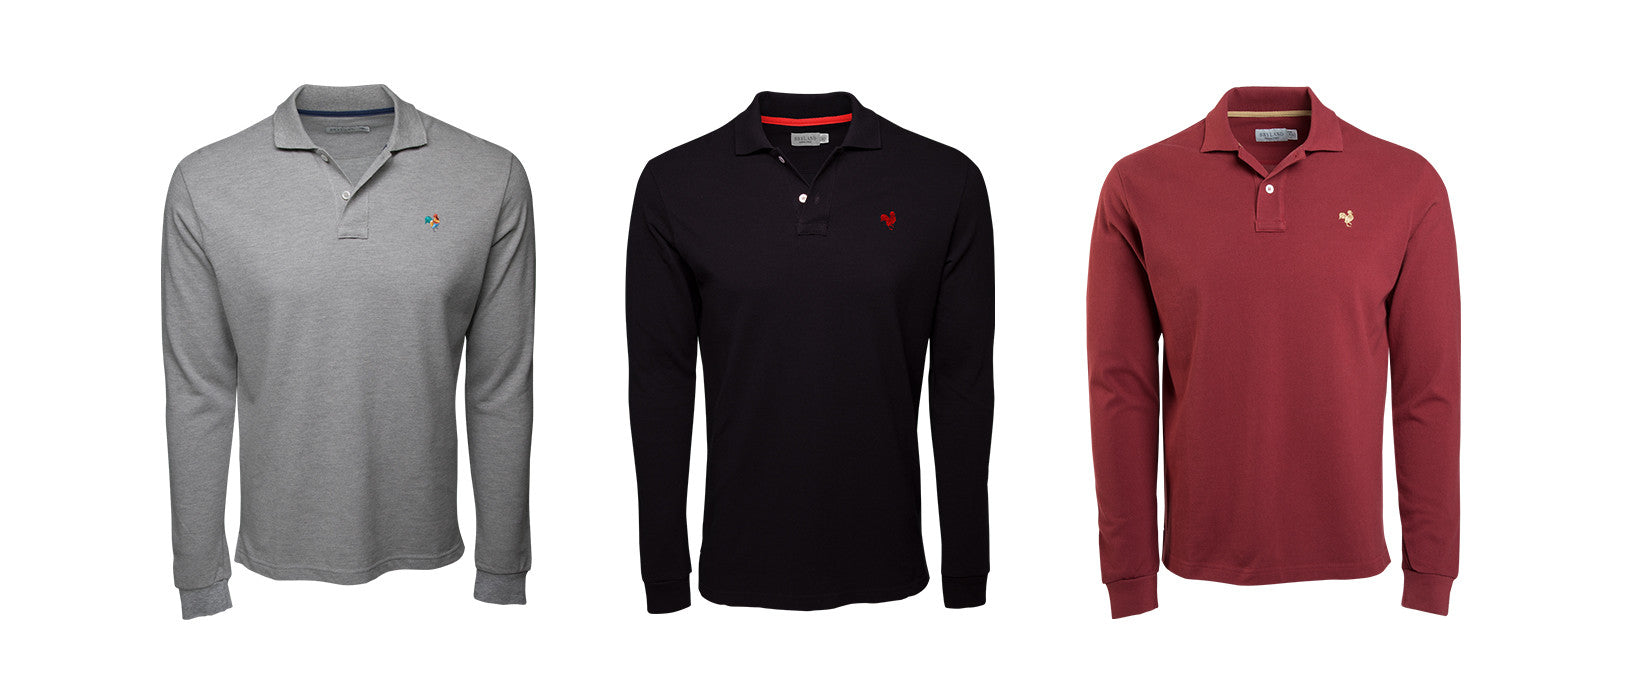 Our collection includes long sleeve polo shirts for Spring/Summer